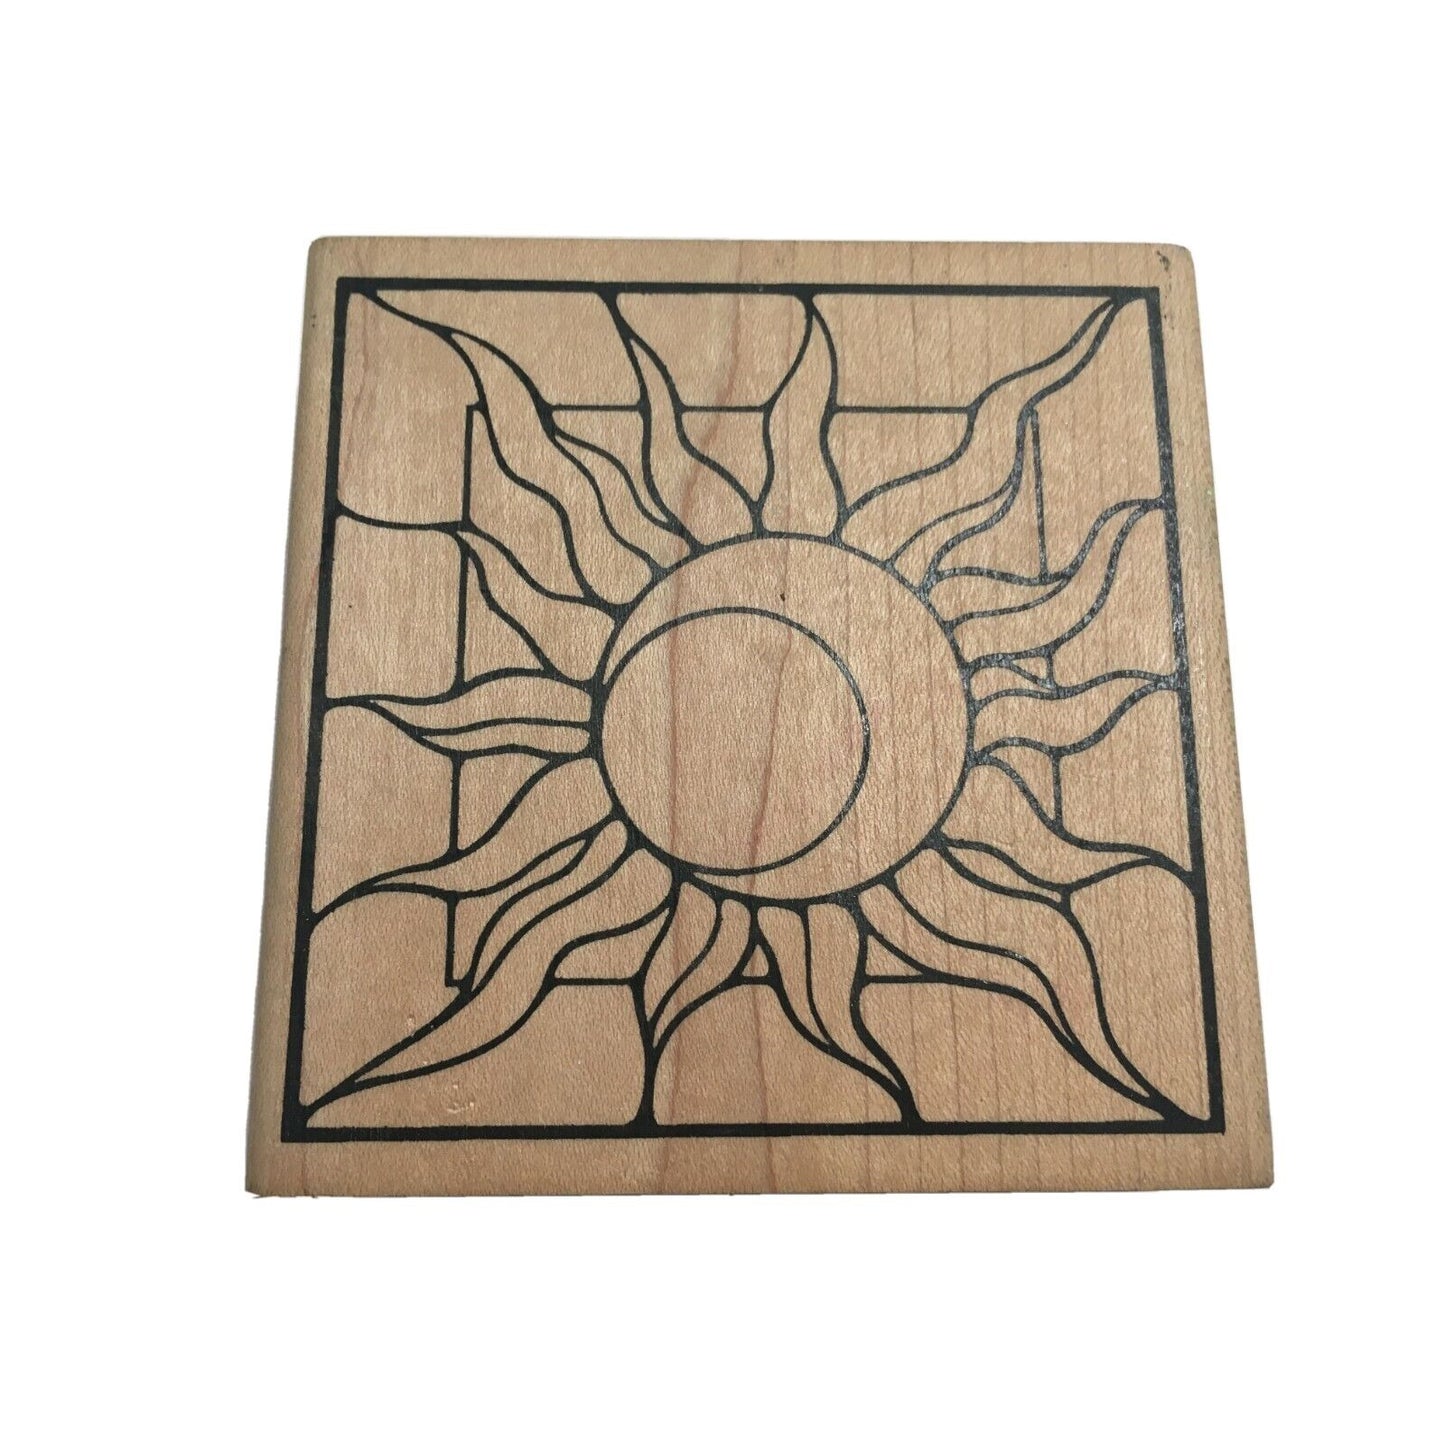 Judikins Day & Night Sun Moon Square Abstract Rubber Stamp Card Making Craft Art